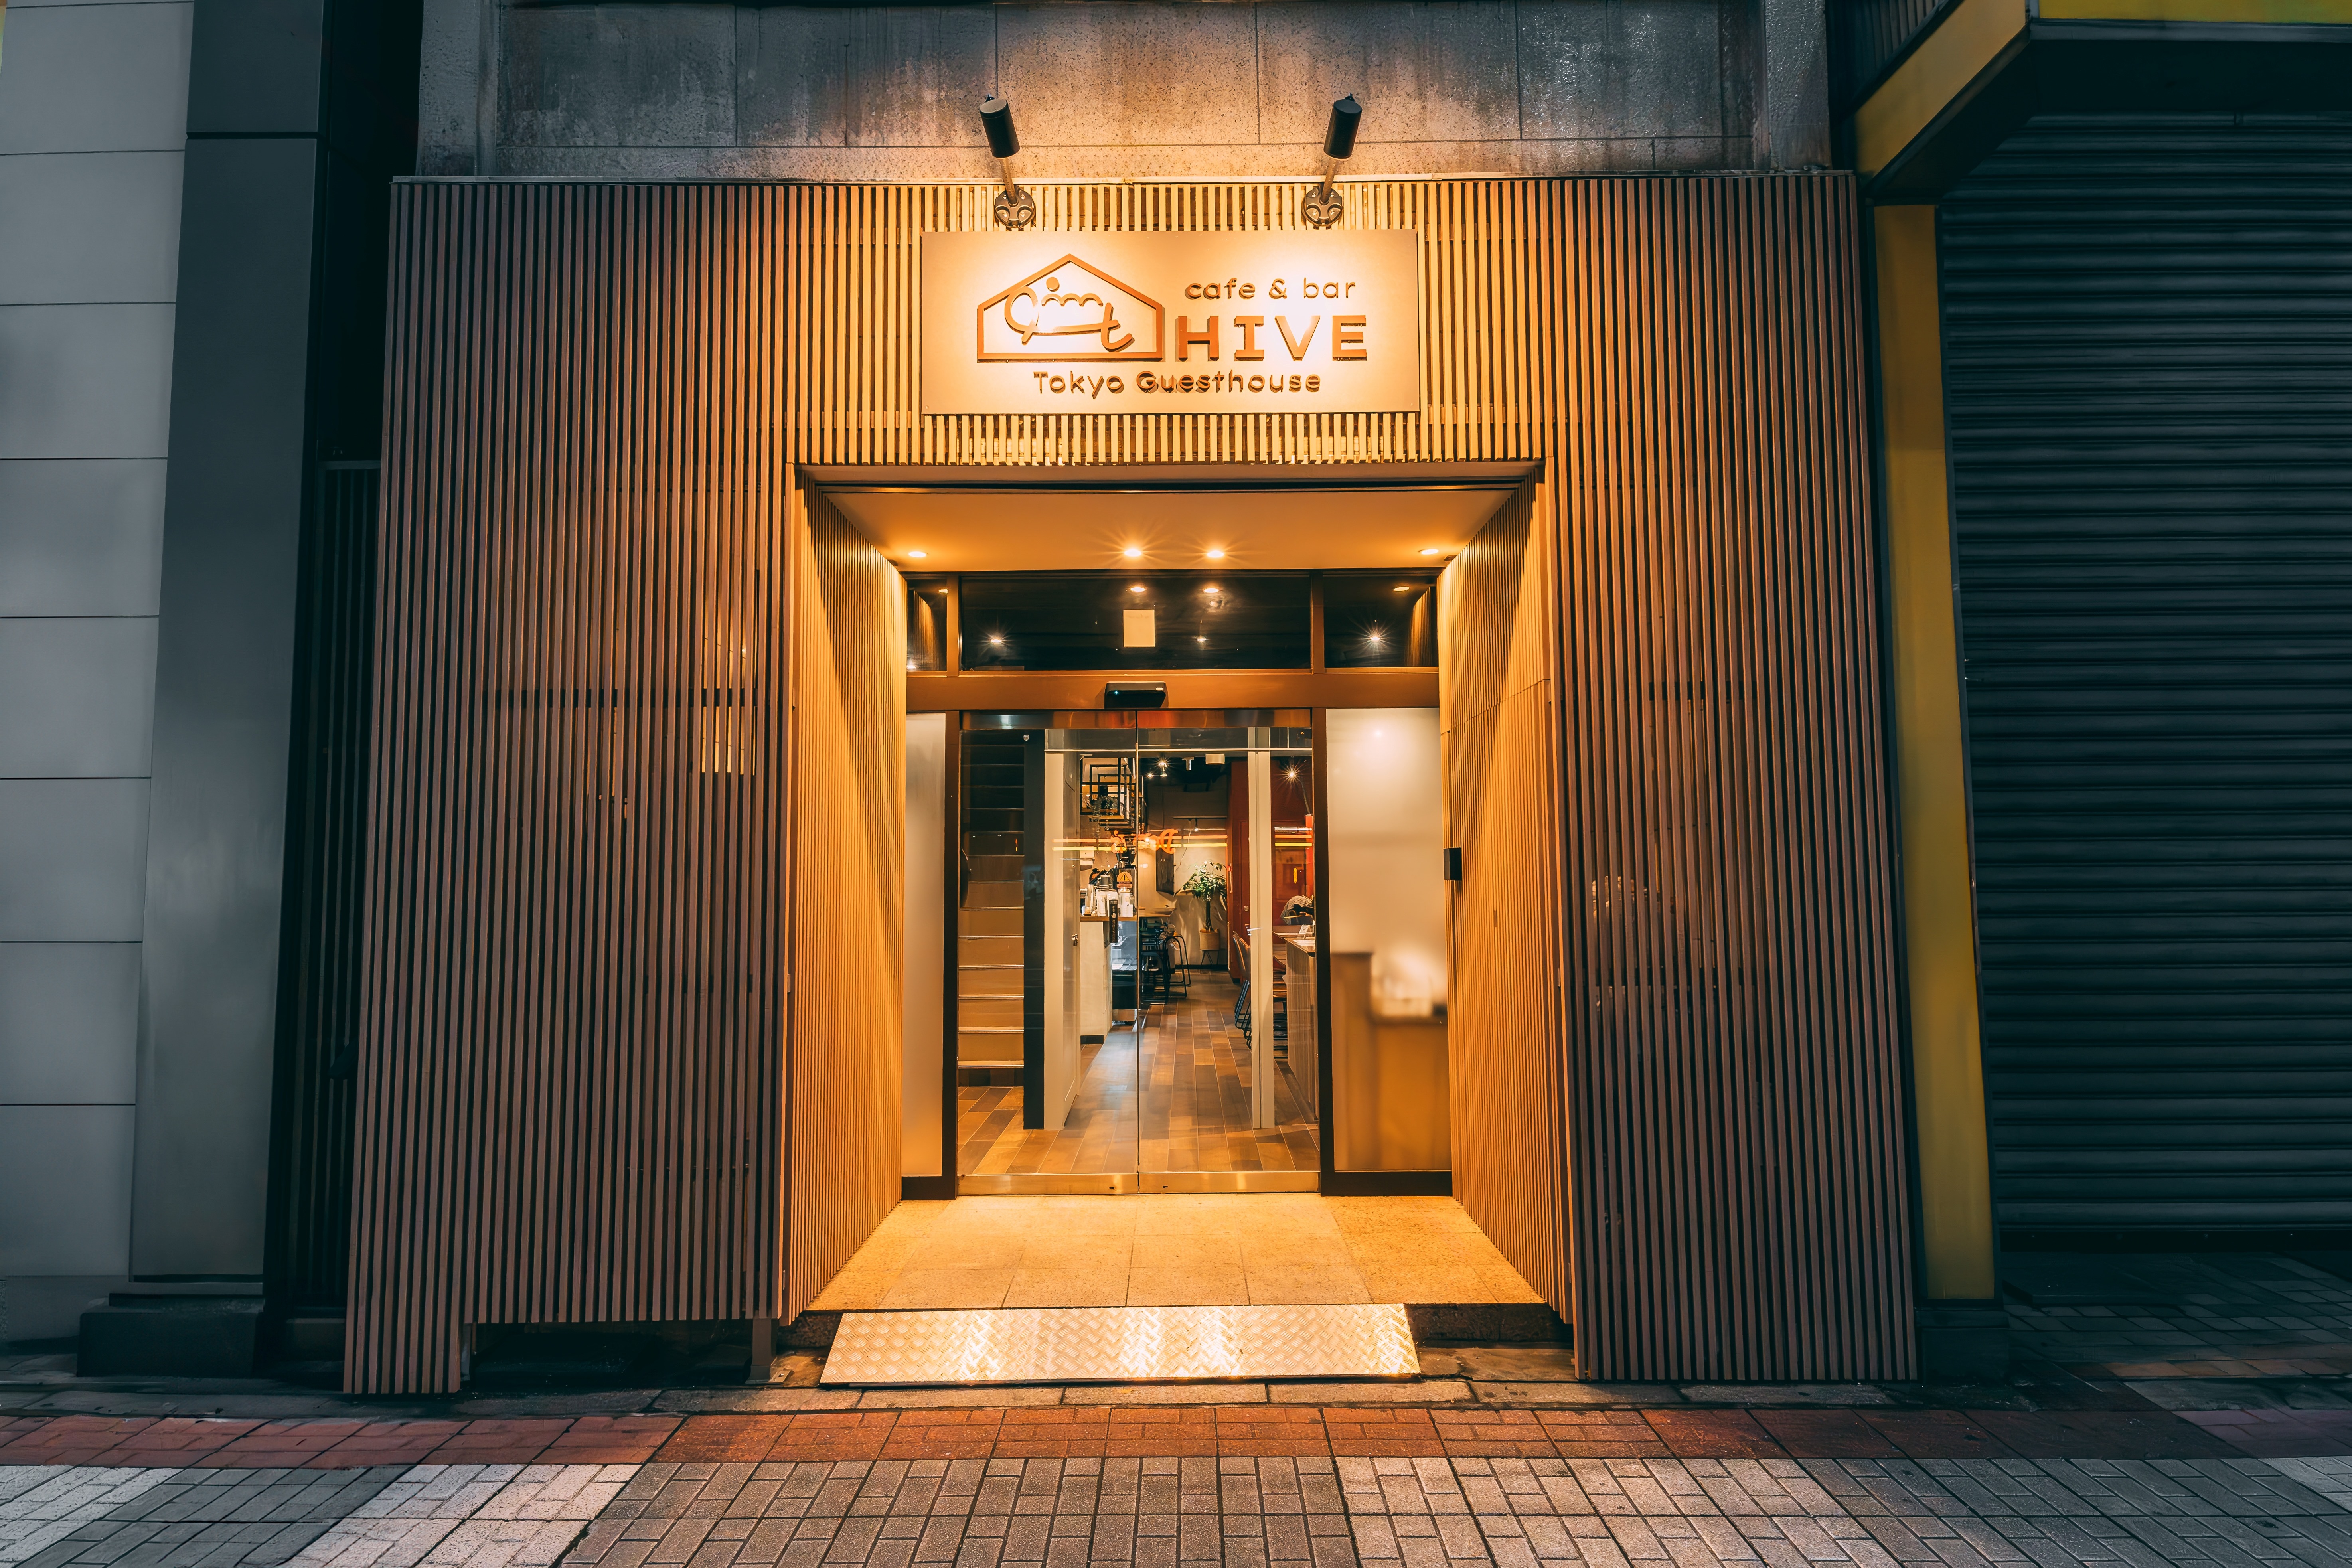 TOKYO GESTHOUSE HIVE